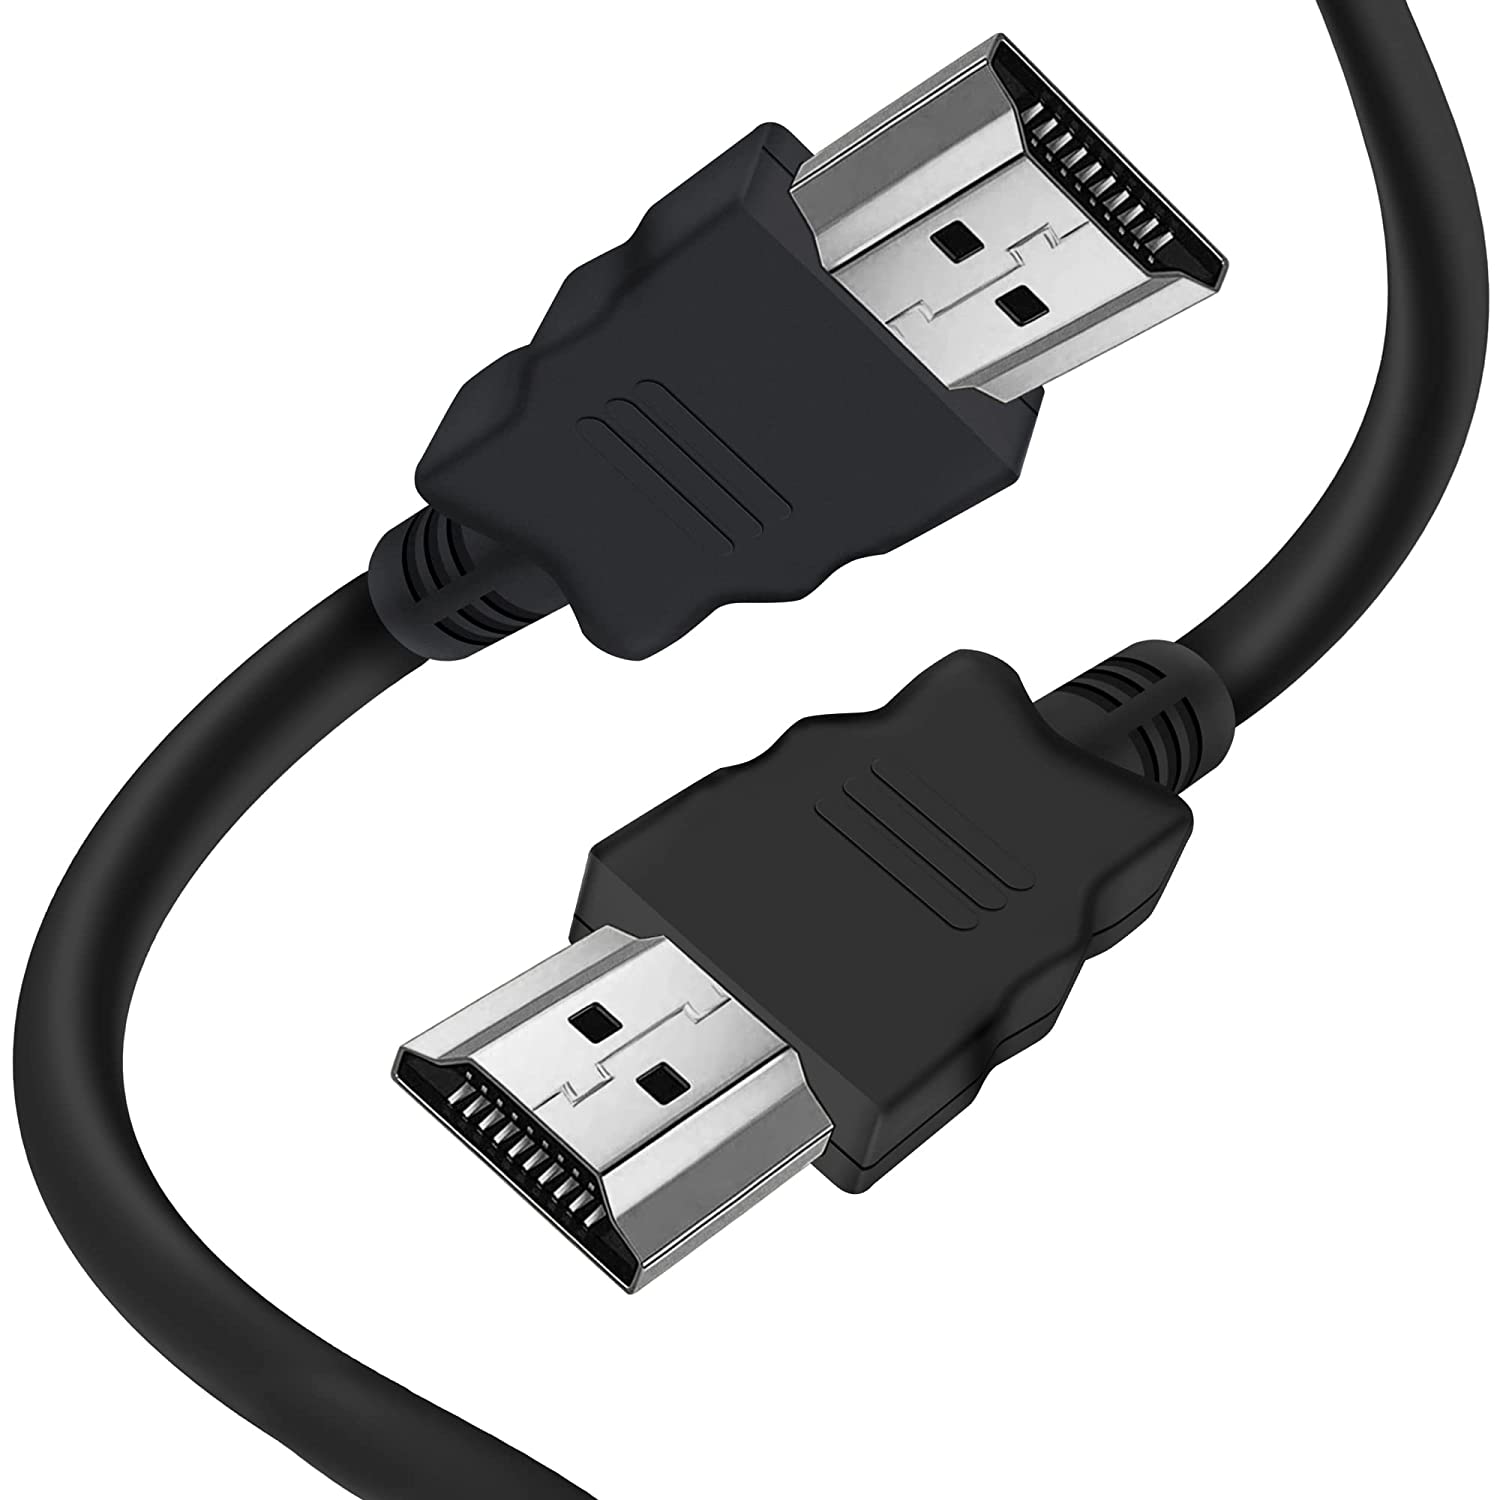 HDMI Cable connect devices televisions, monitors, projectors, gaming consoles, Blu-ray players, computers etc